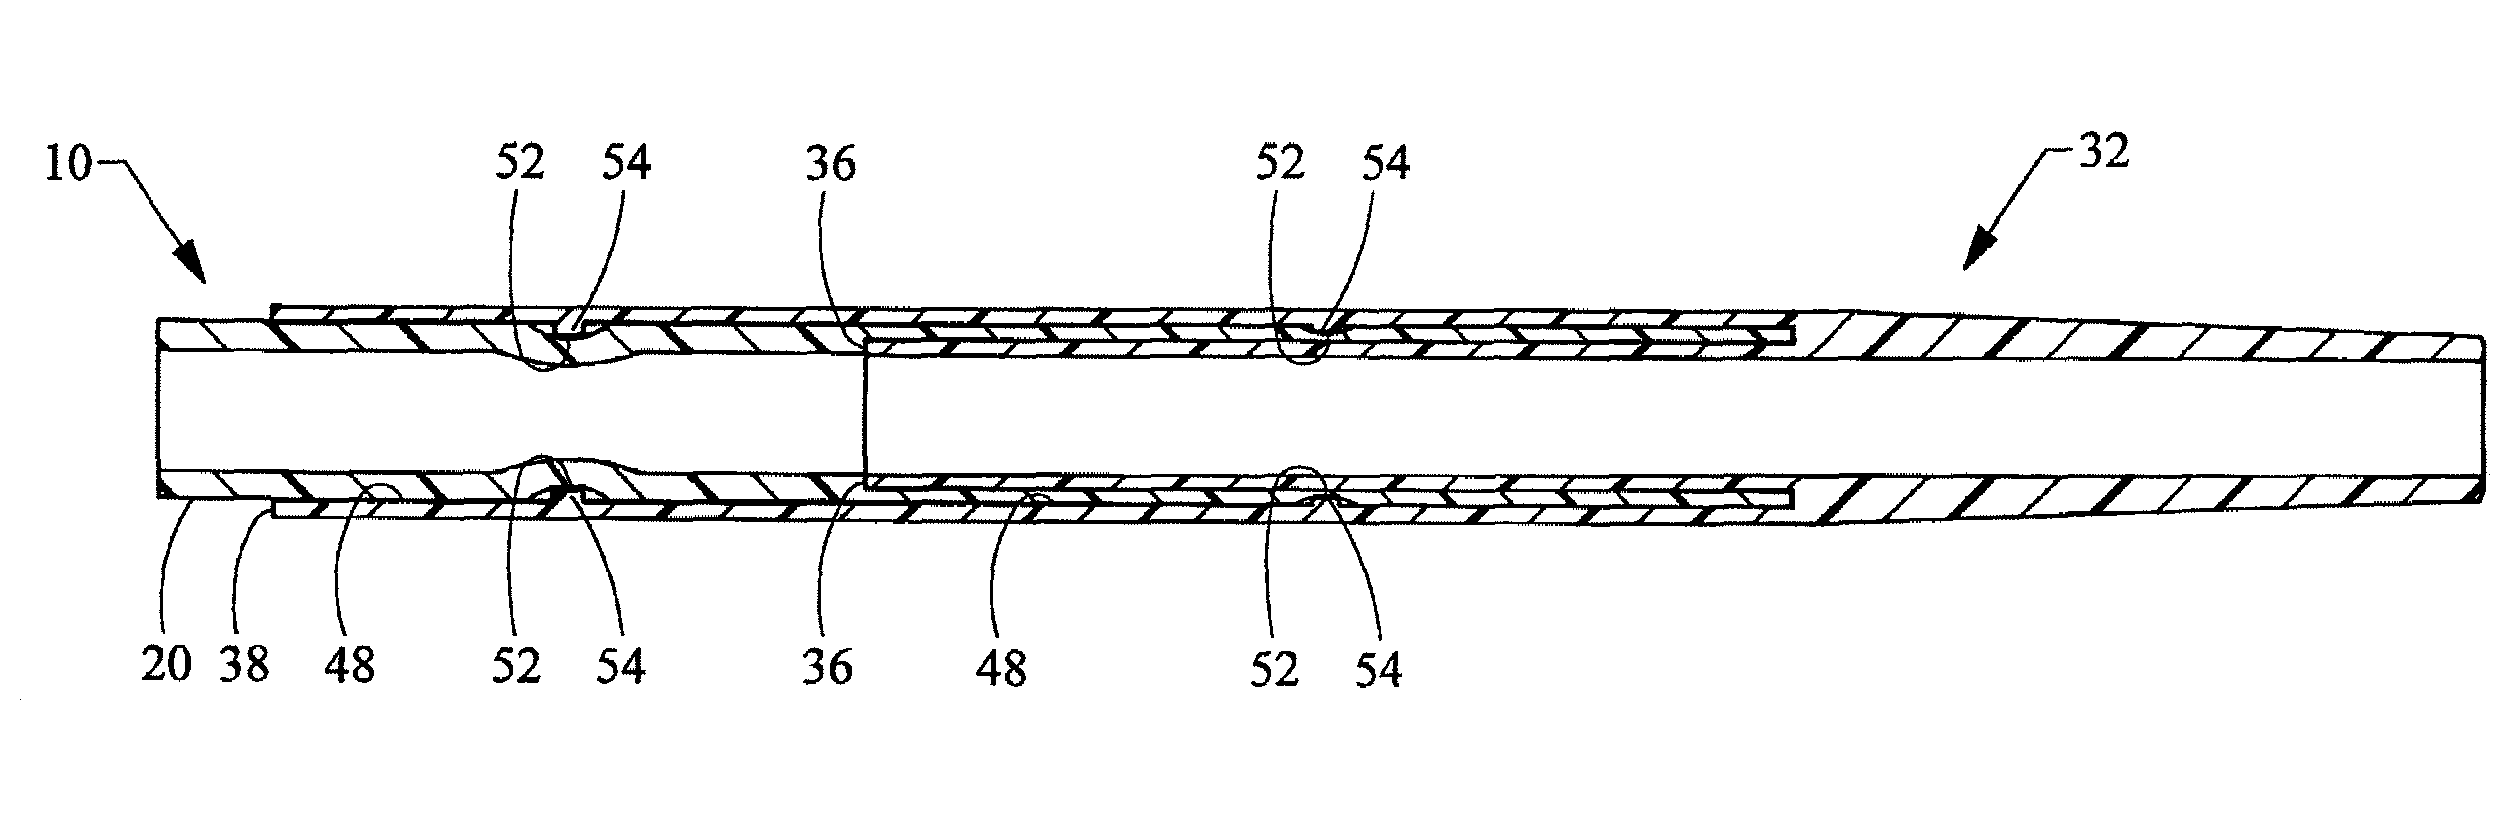 Method incorporating a tip into an endovascular device